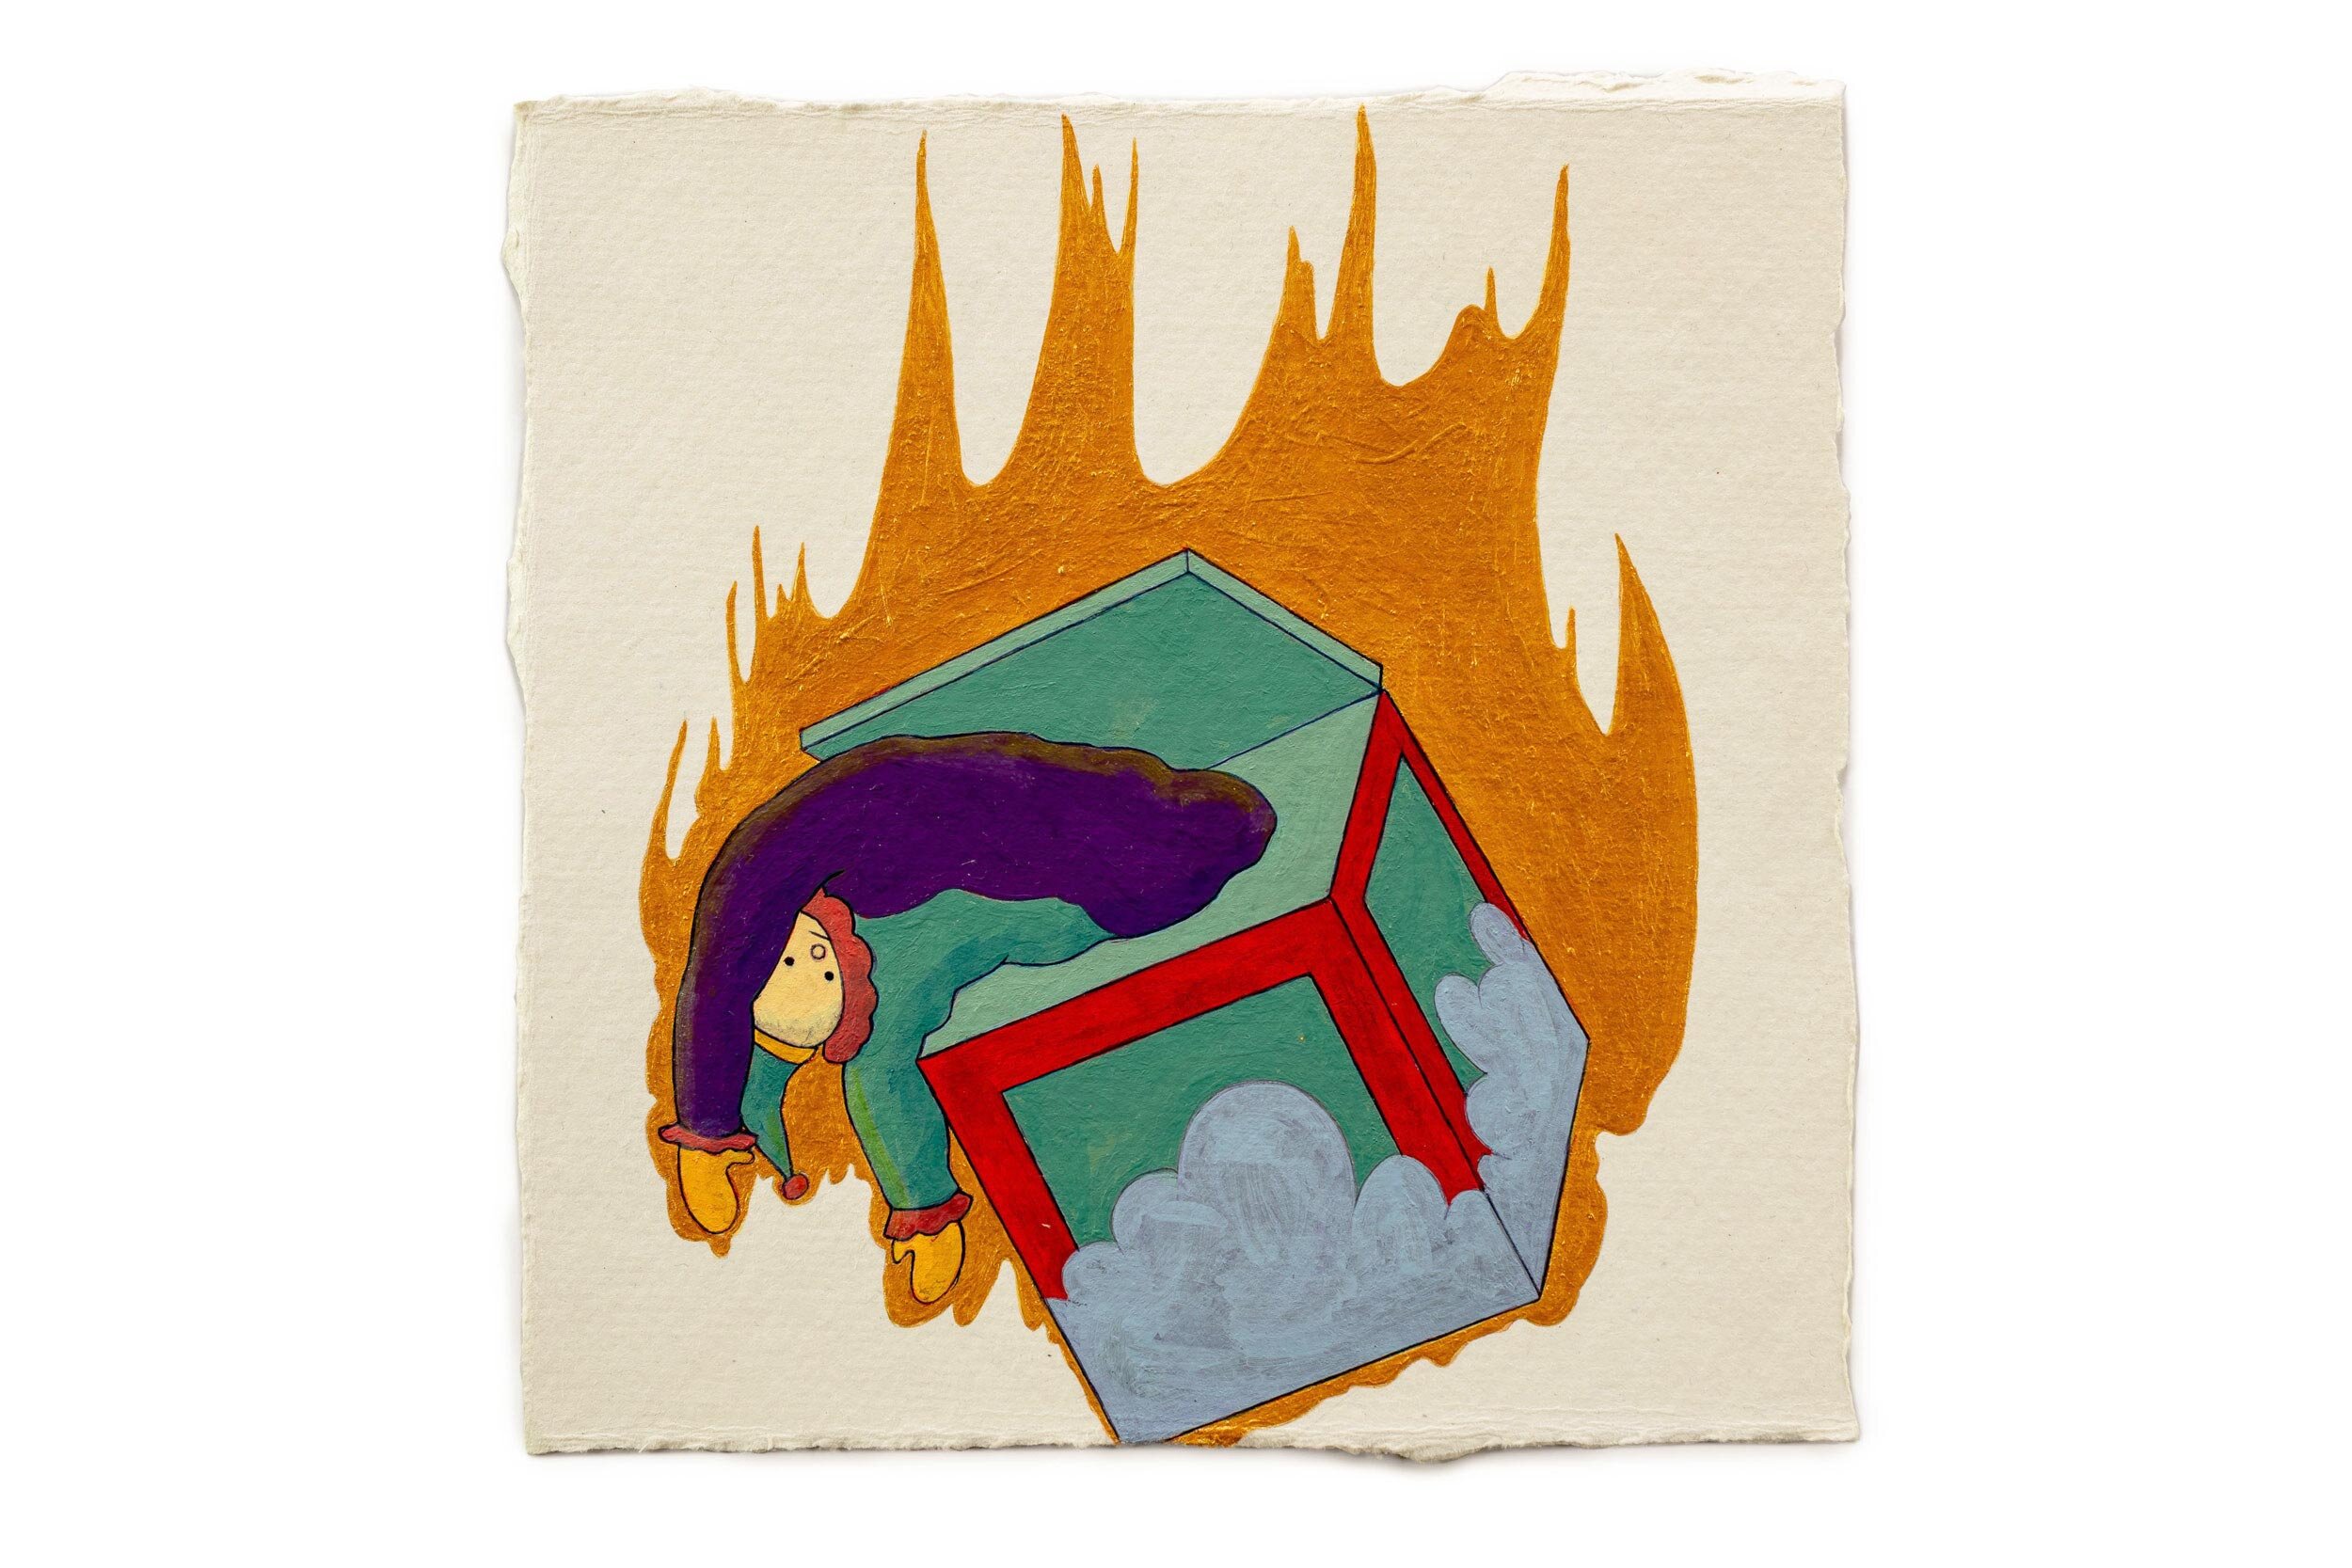   Fire Diary (Unhappy Toys),  2019 Acrylic on paper, 6” x 6” each 